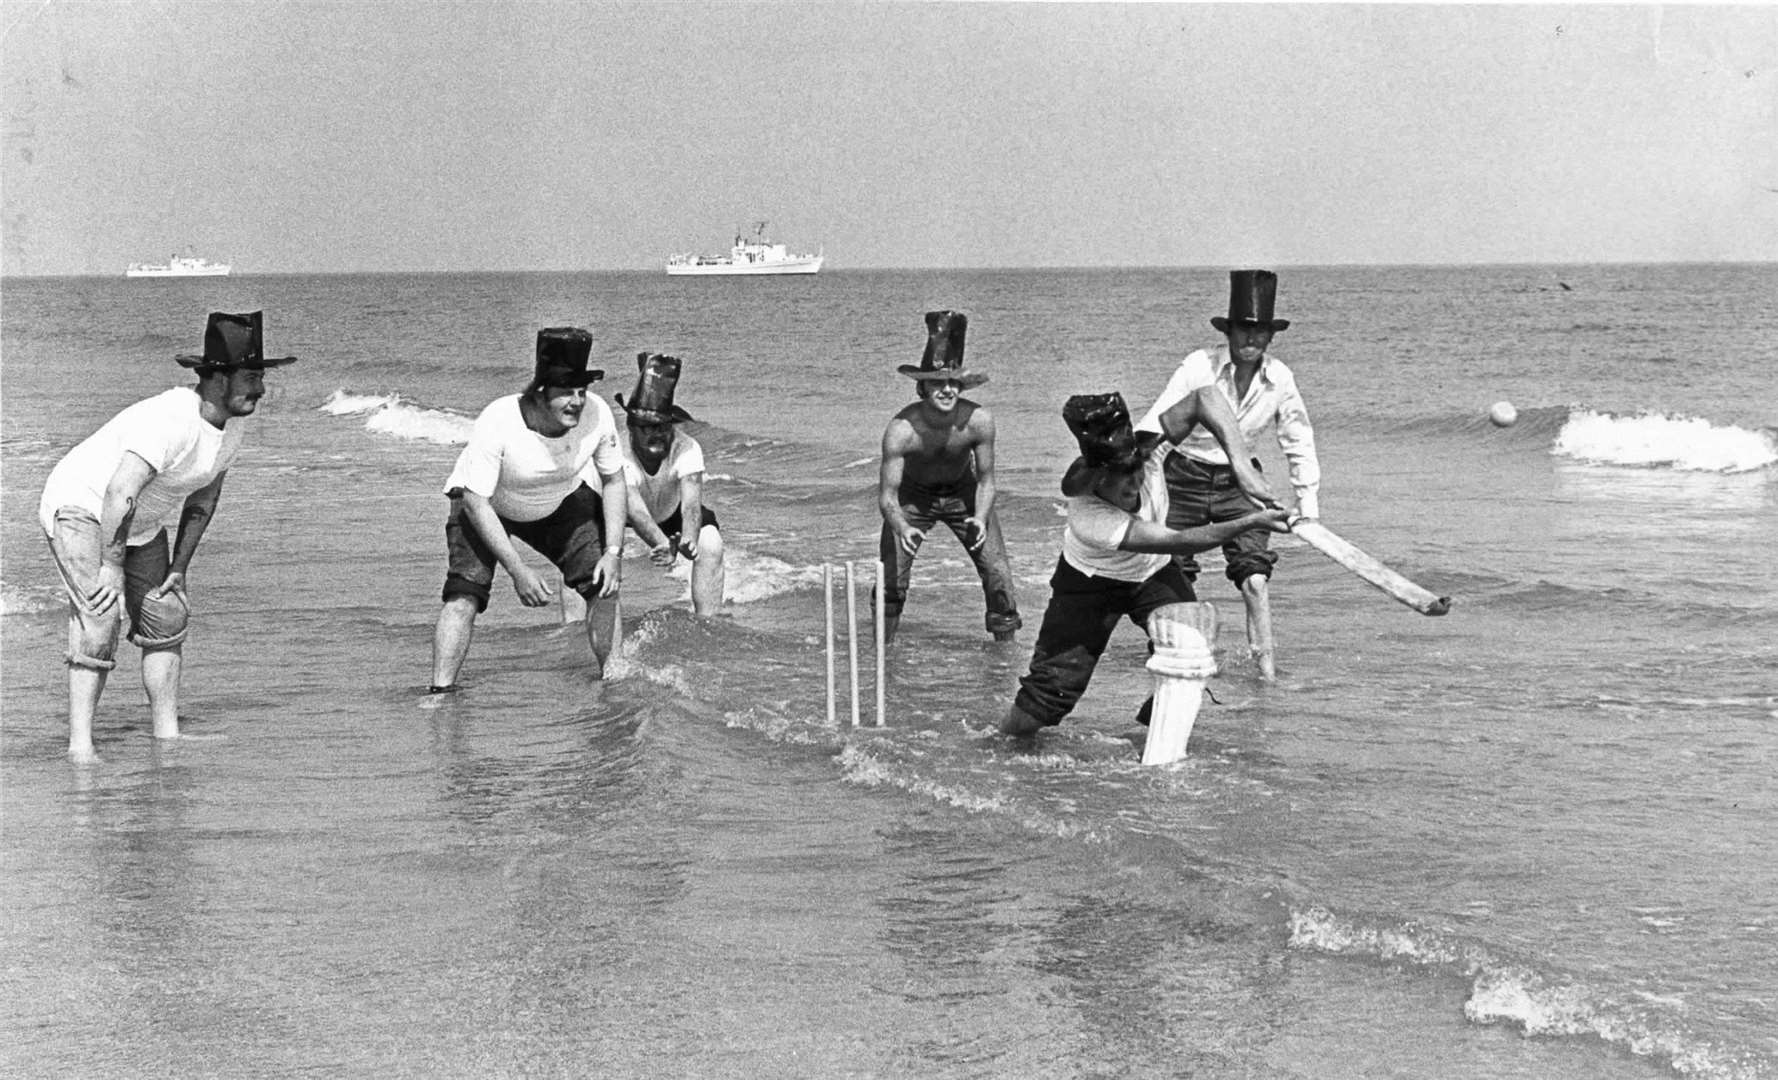 This crazy cricket match on the Goodwin Sands near Deal in 1973 was played between two teams from three Chatham-based survey ships. it was limited to 15 overs a side - because of the tide